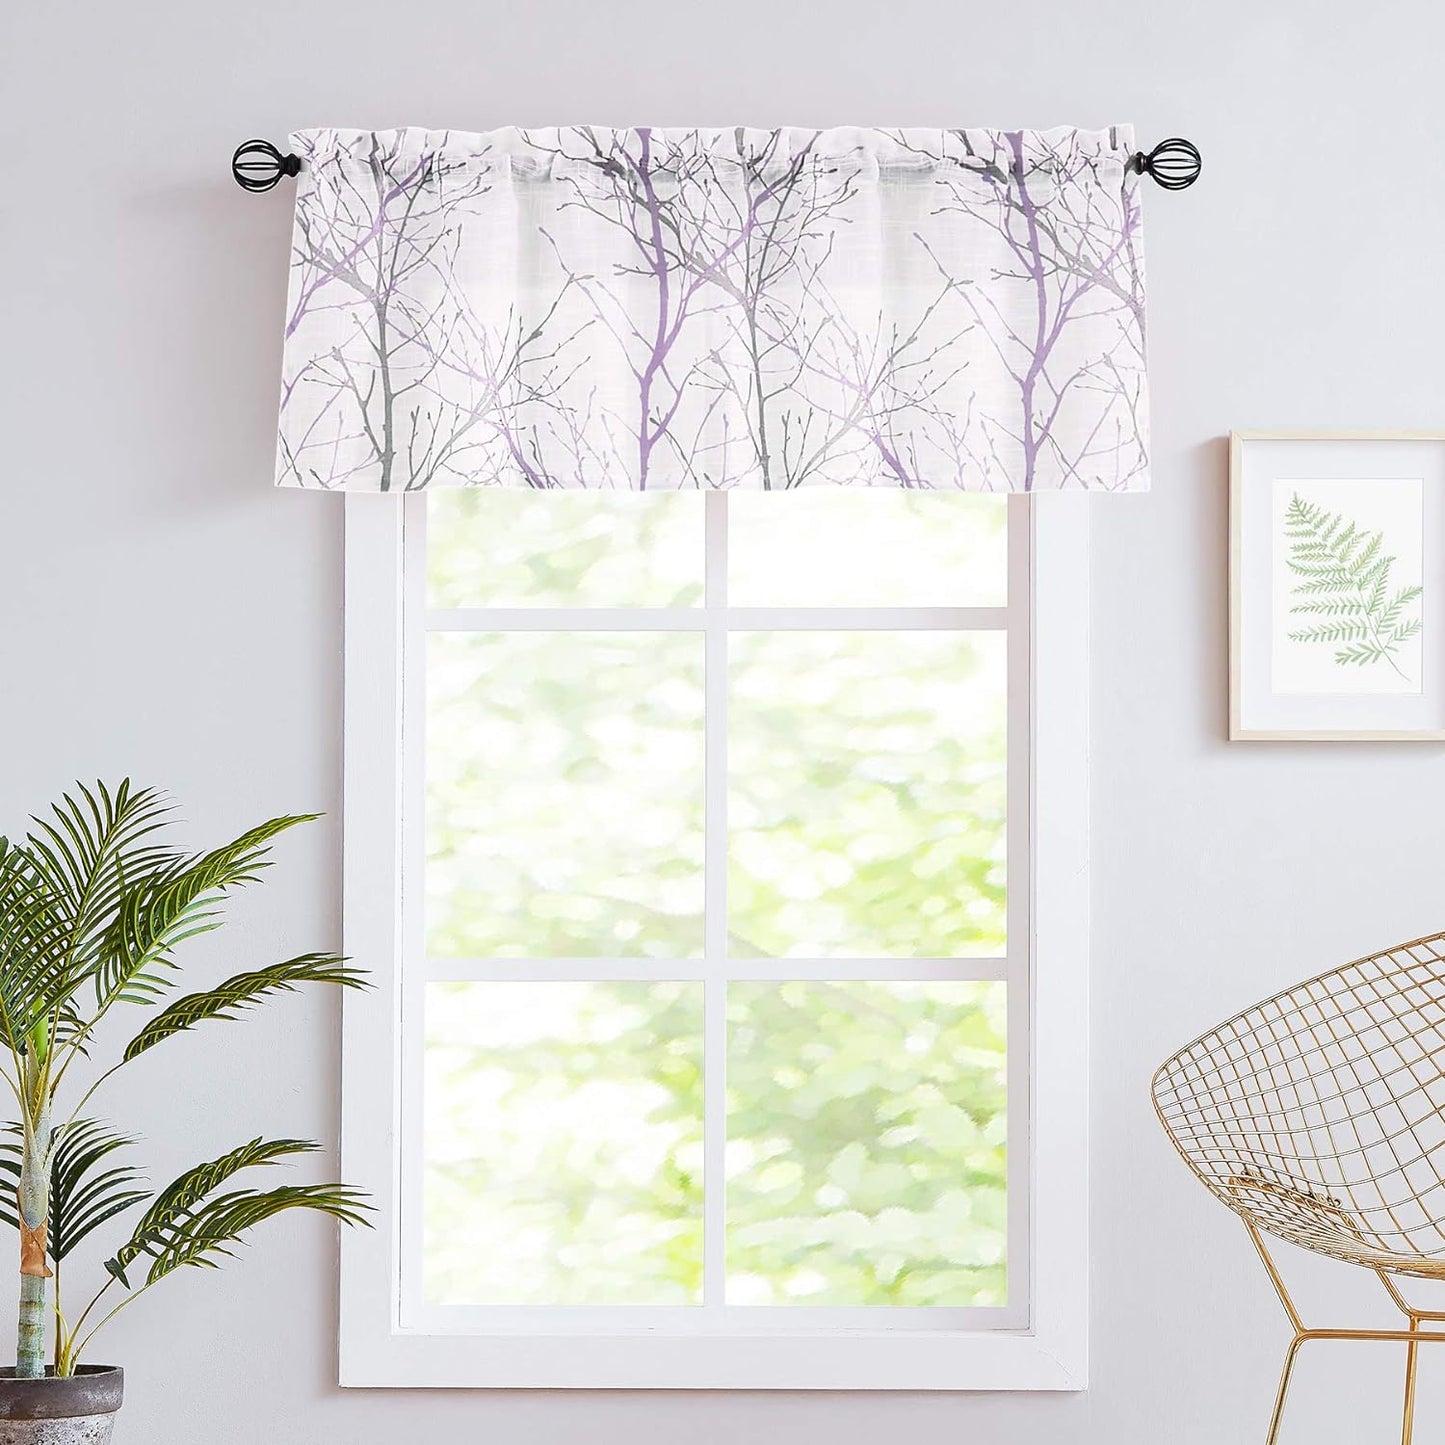 FMFUNCTEX Blue White Curtains for Kitchen Living Room 72“ Grey Tree Branches Print Curtain Set for Small Windows Linen Textured Semi-Sheer Drapes for Bedroom Grommet Top, 2 Panels  Fmfunctex Lilac 50" X 18" 1Pc 